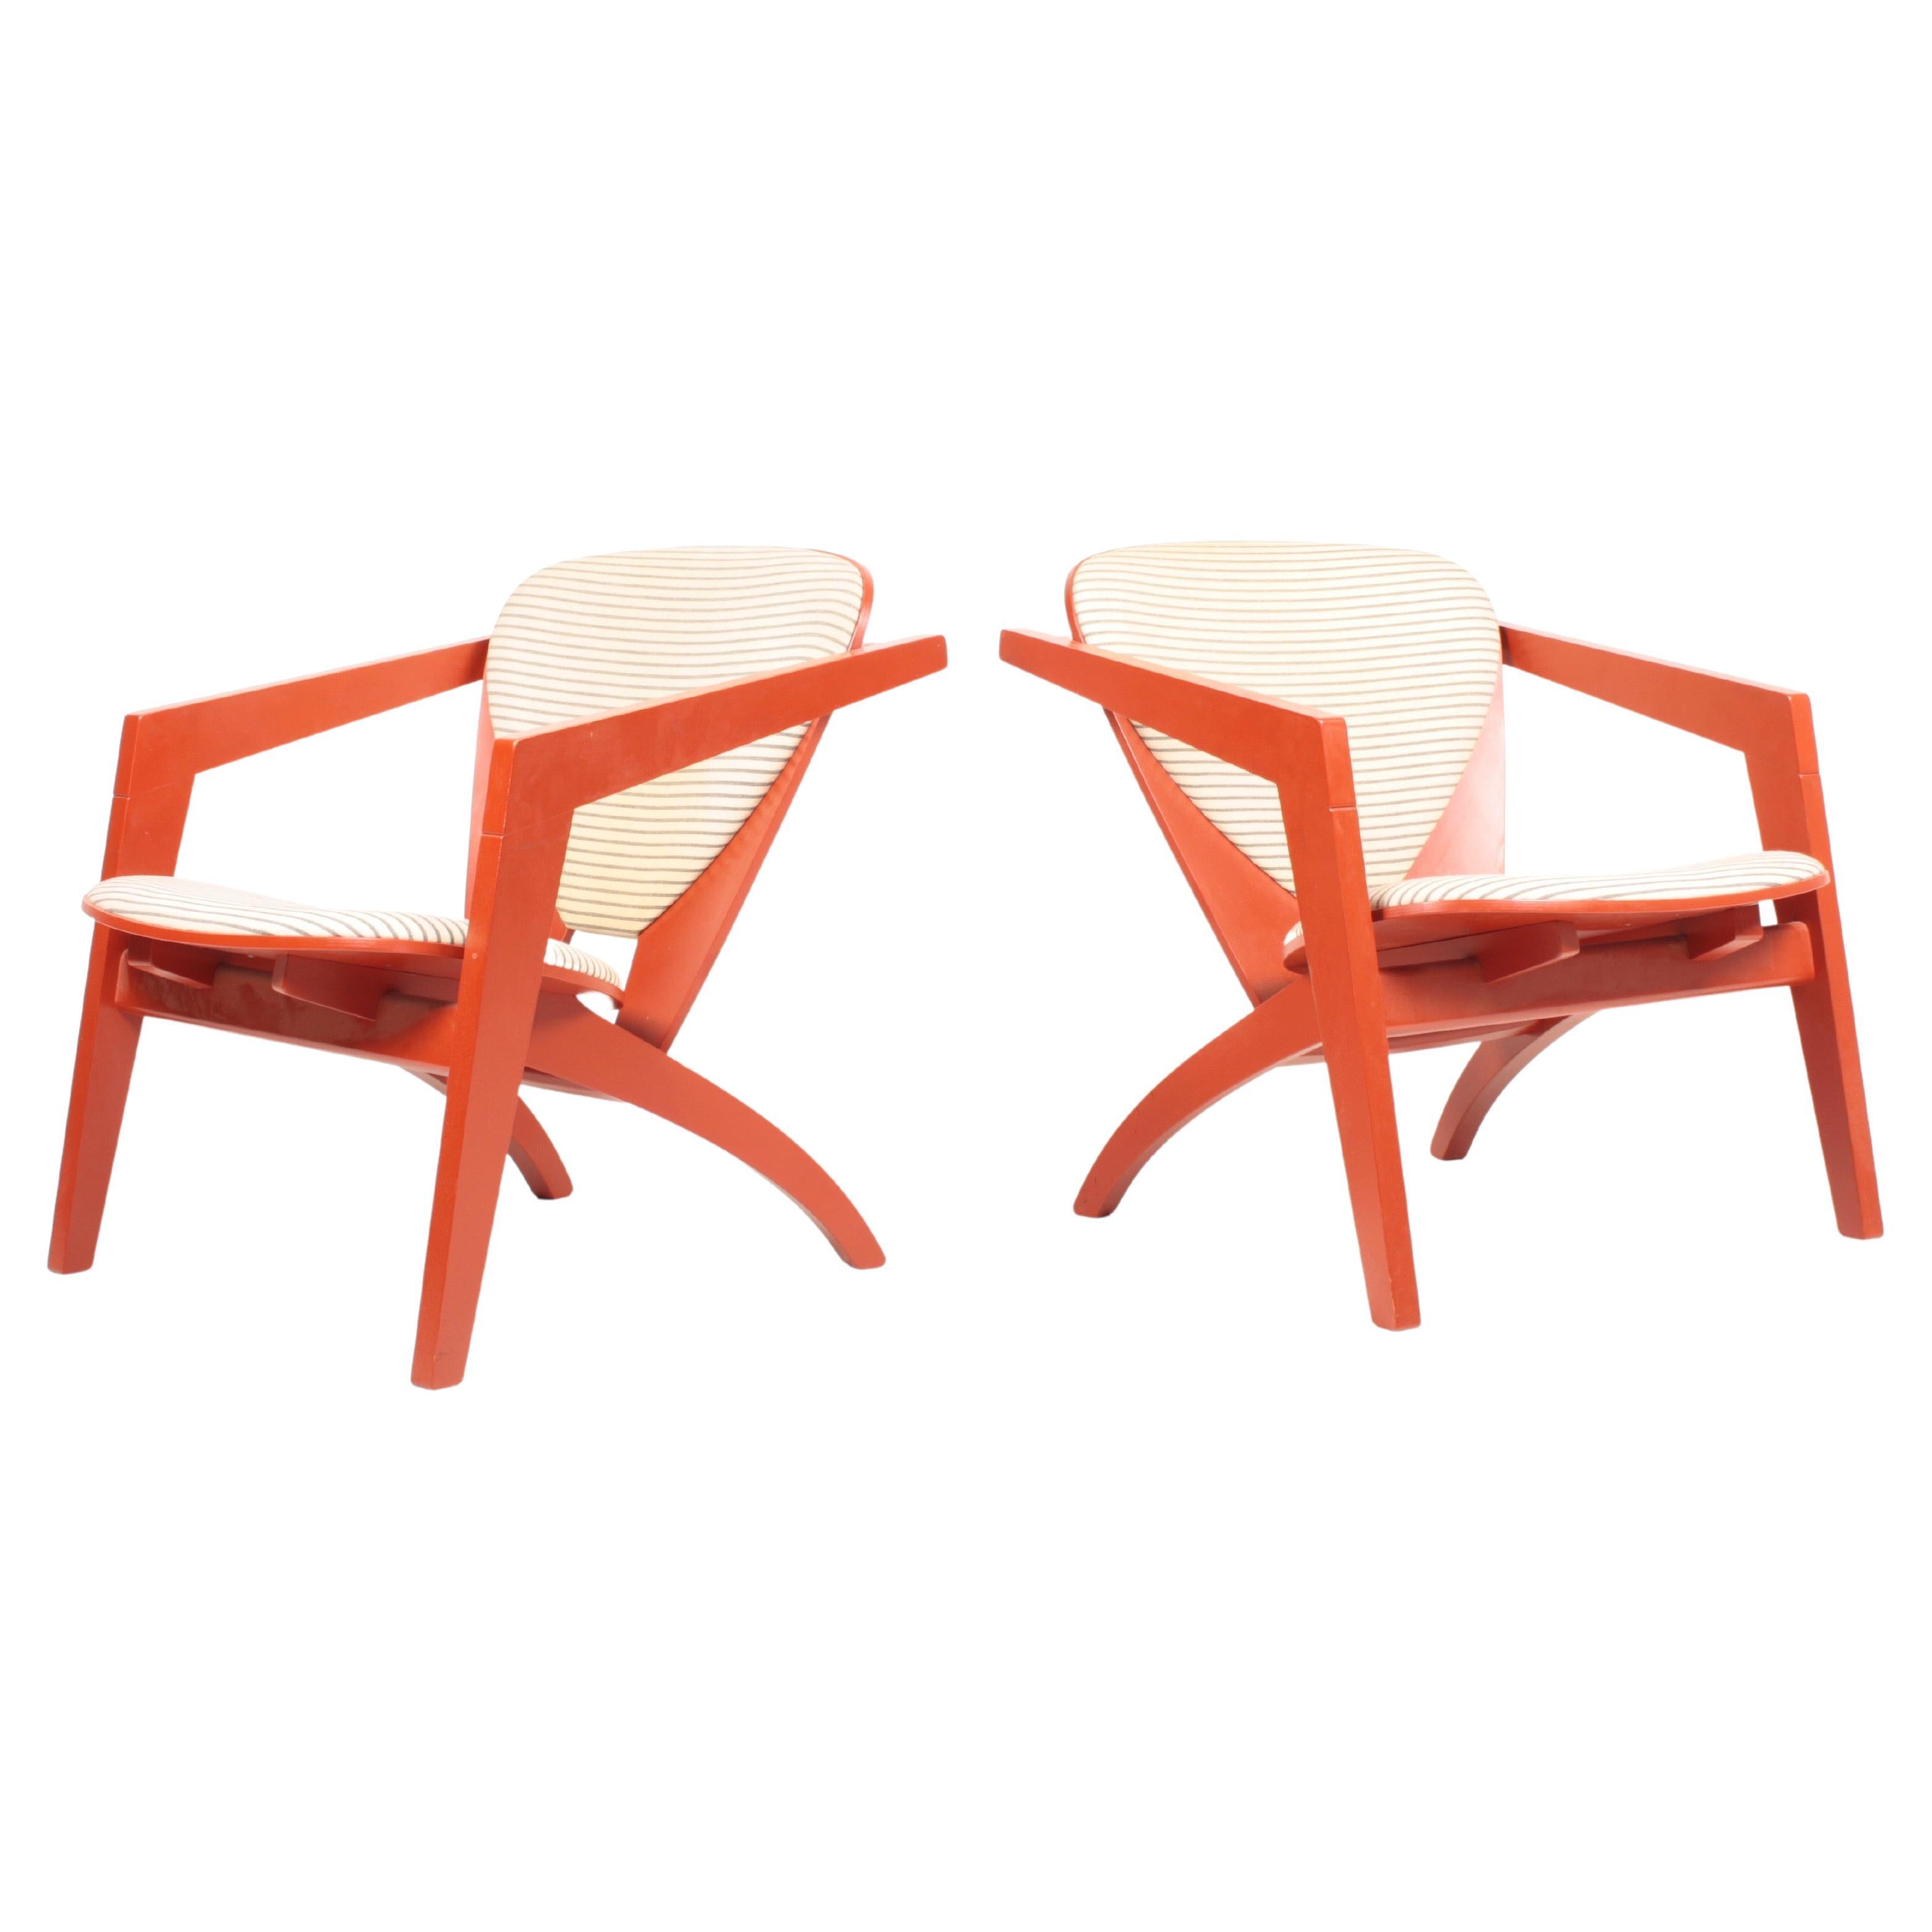 Pair of Lounge Chairs Model Ge460 by Hans Wegner, 1970s